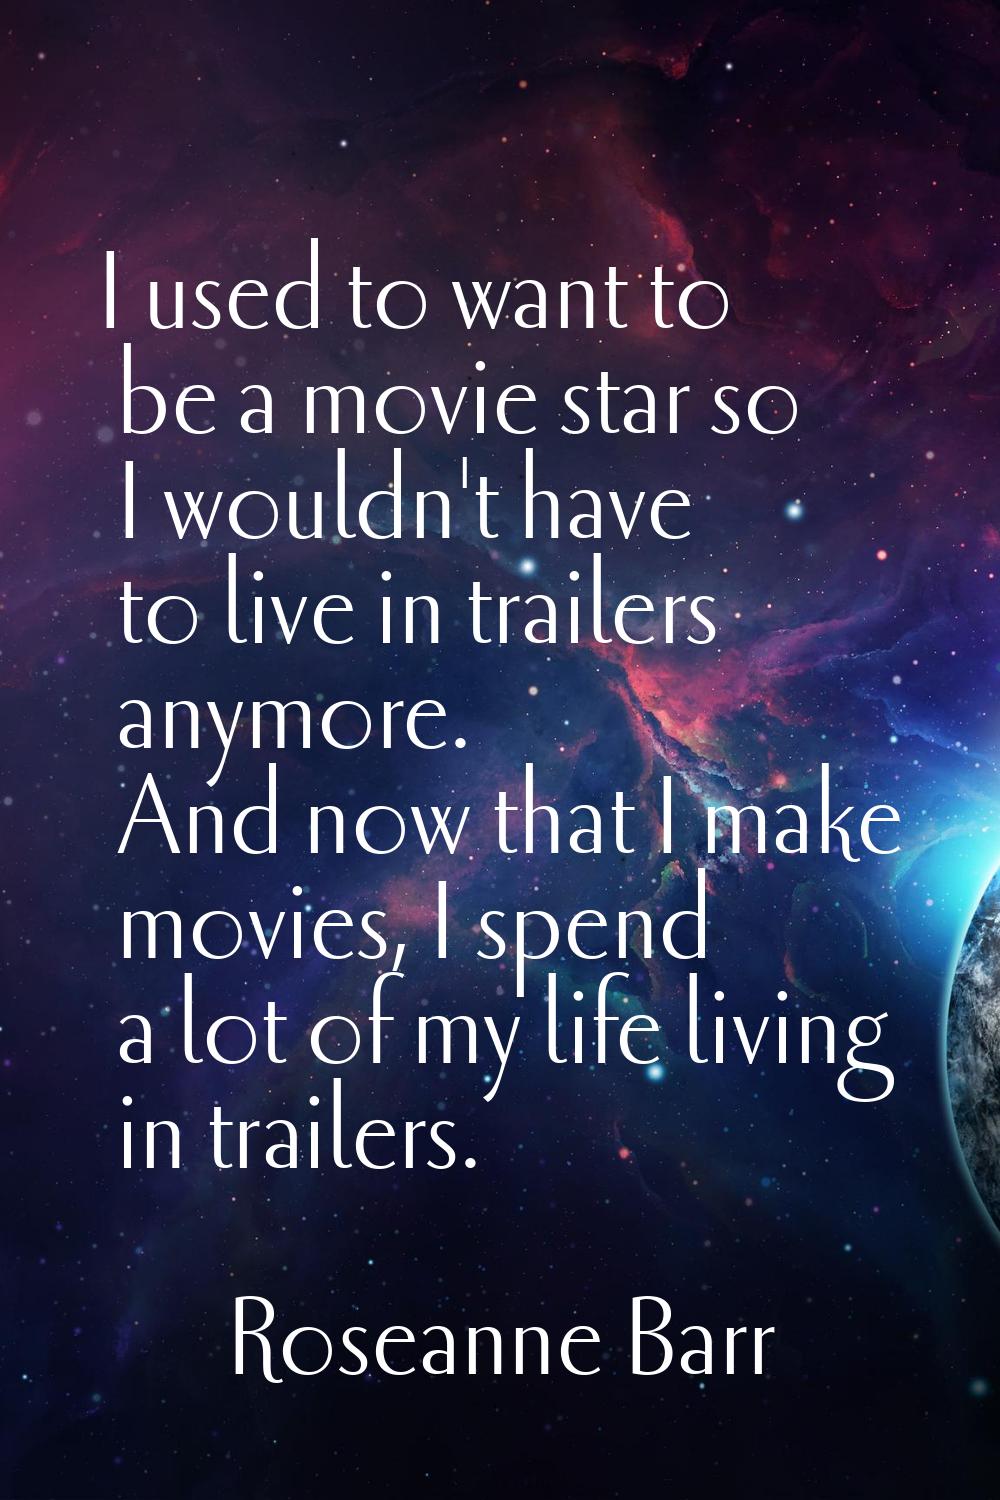 I used to want to be a movie star so I wouldn't have to live in trailers anymore. And now that I ma